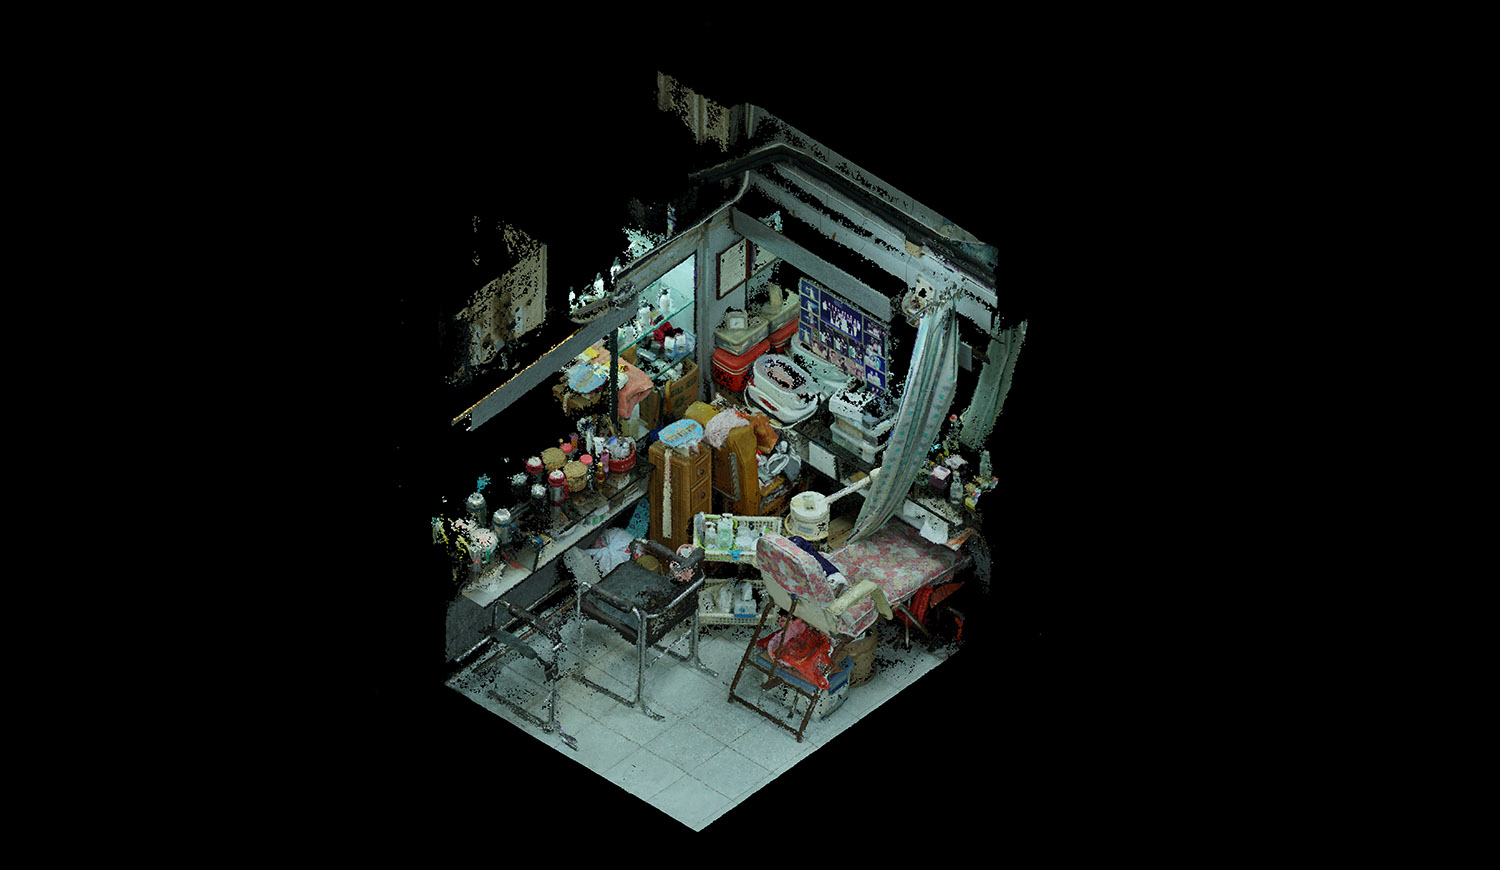 Point cloud data from Barber shop